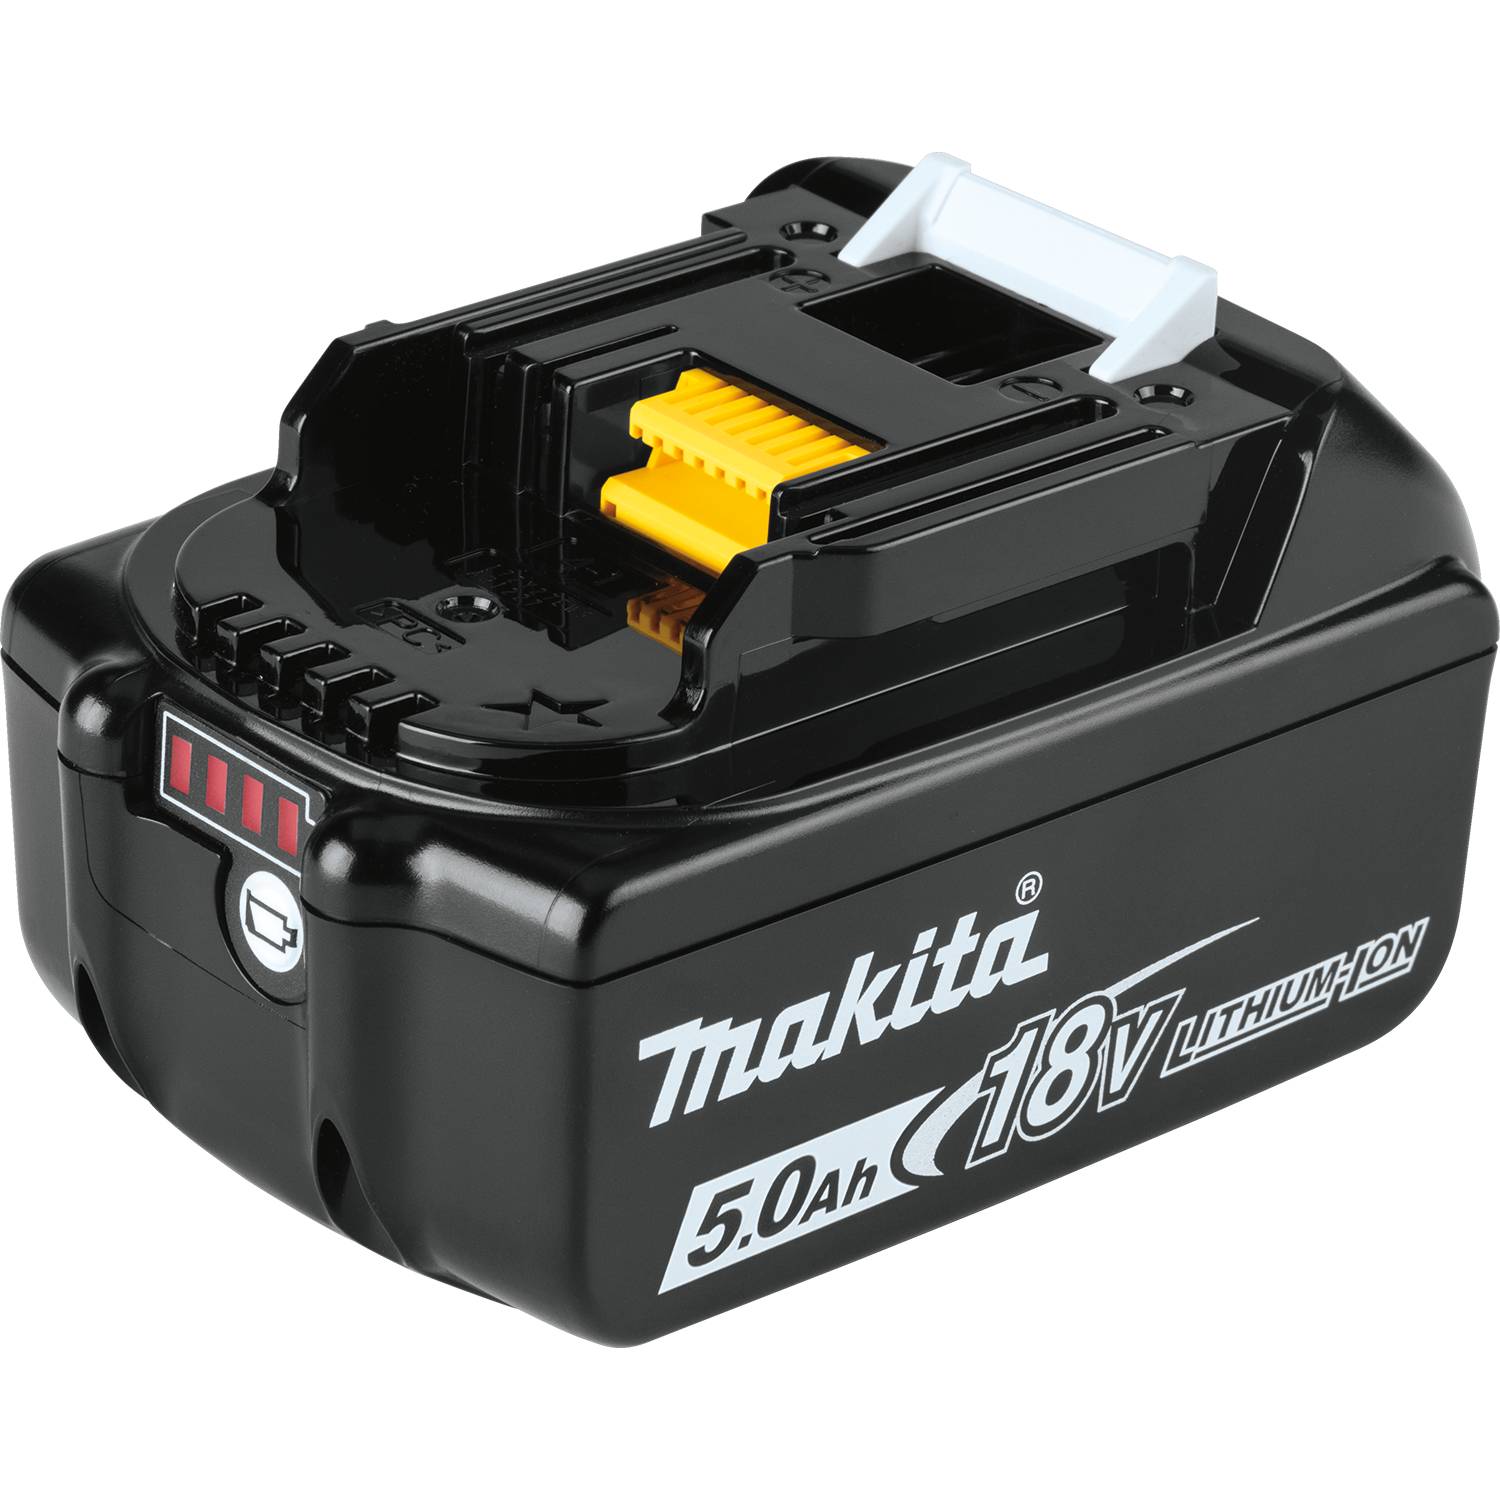 Makita 18V LXT Brushless Cordless 1/2 Inch Hammer Driver-Drill Kit from GME Supply